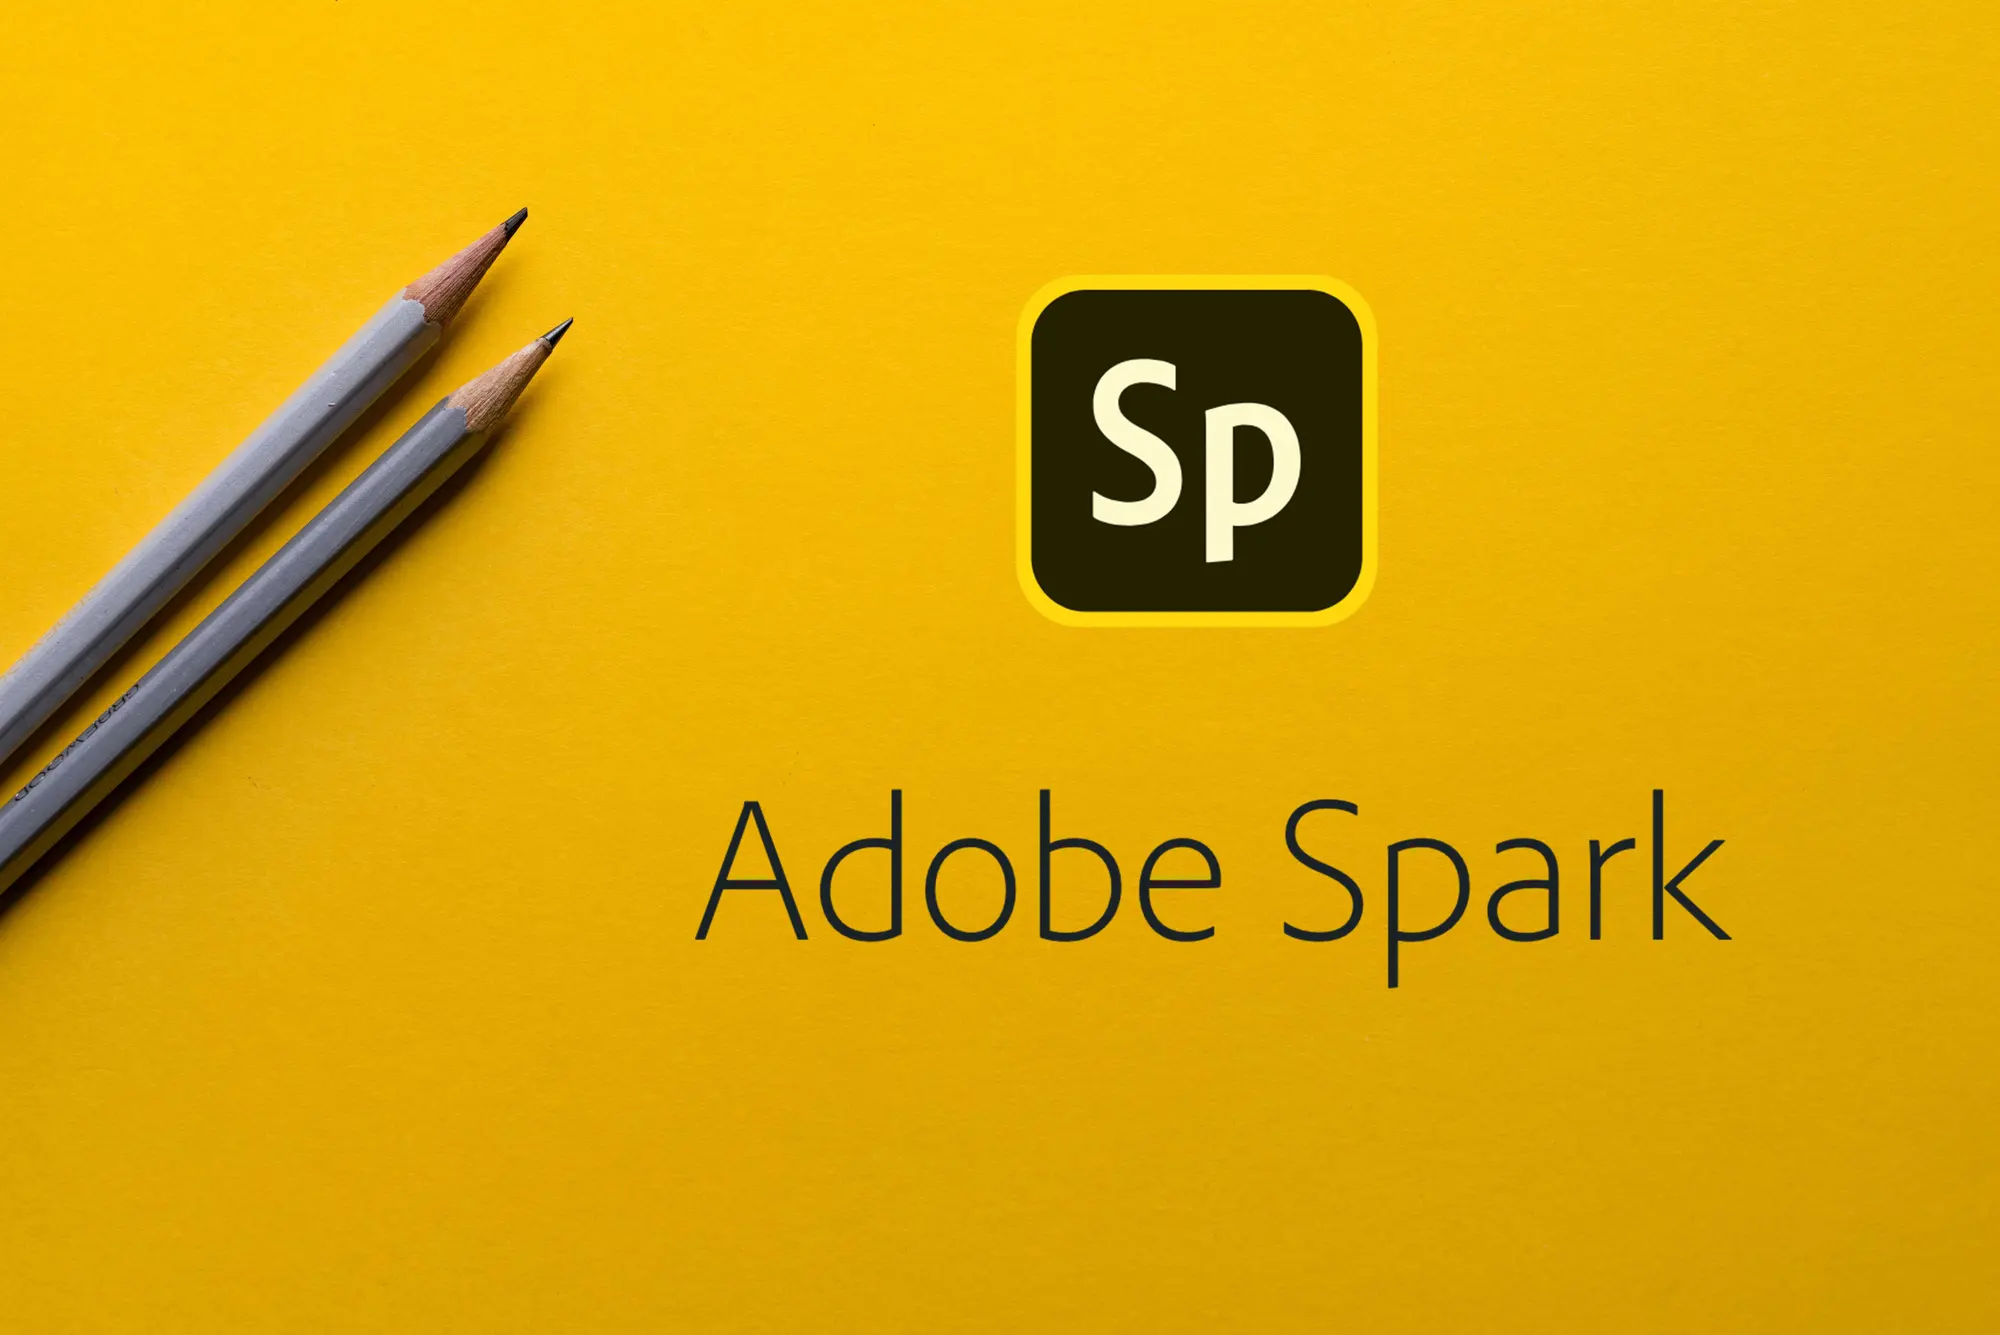 Introducing Adobe Spark for Education